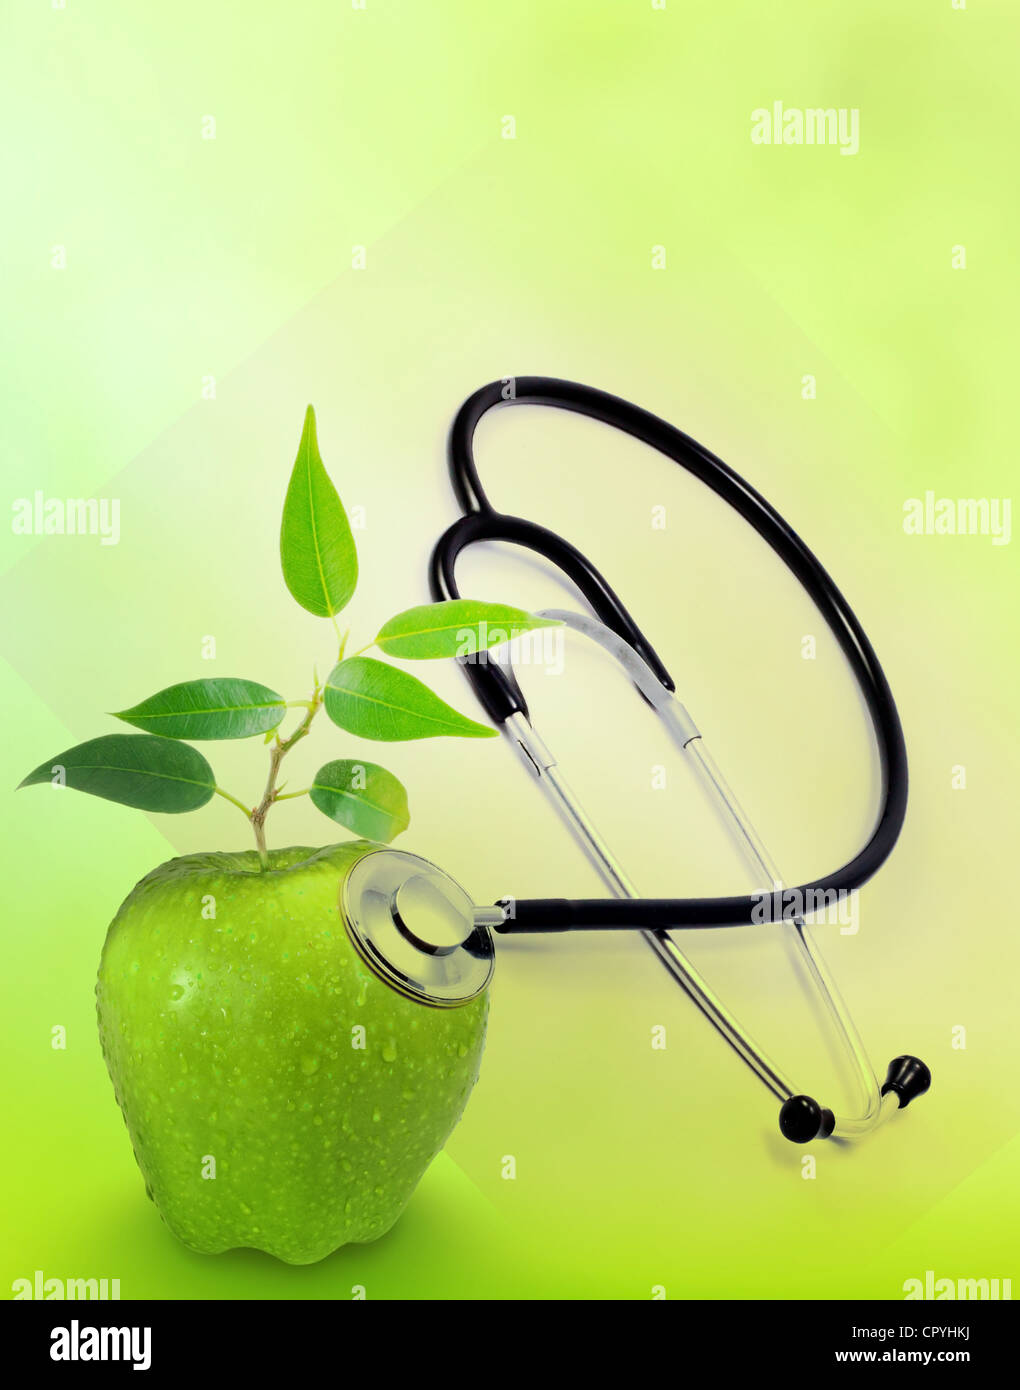 Health and medicine background concept with stethoscope and green apple like a sign of health Stock Photo